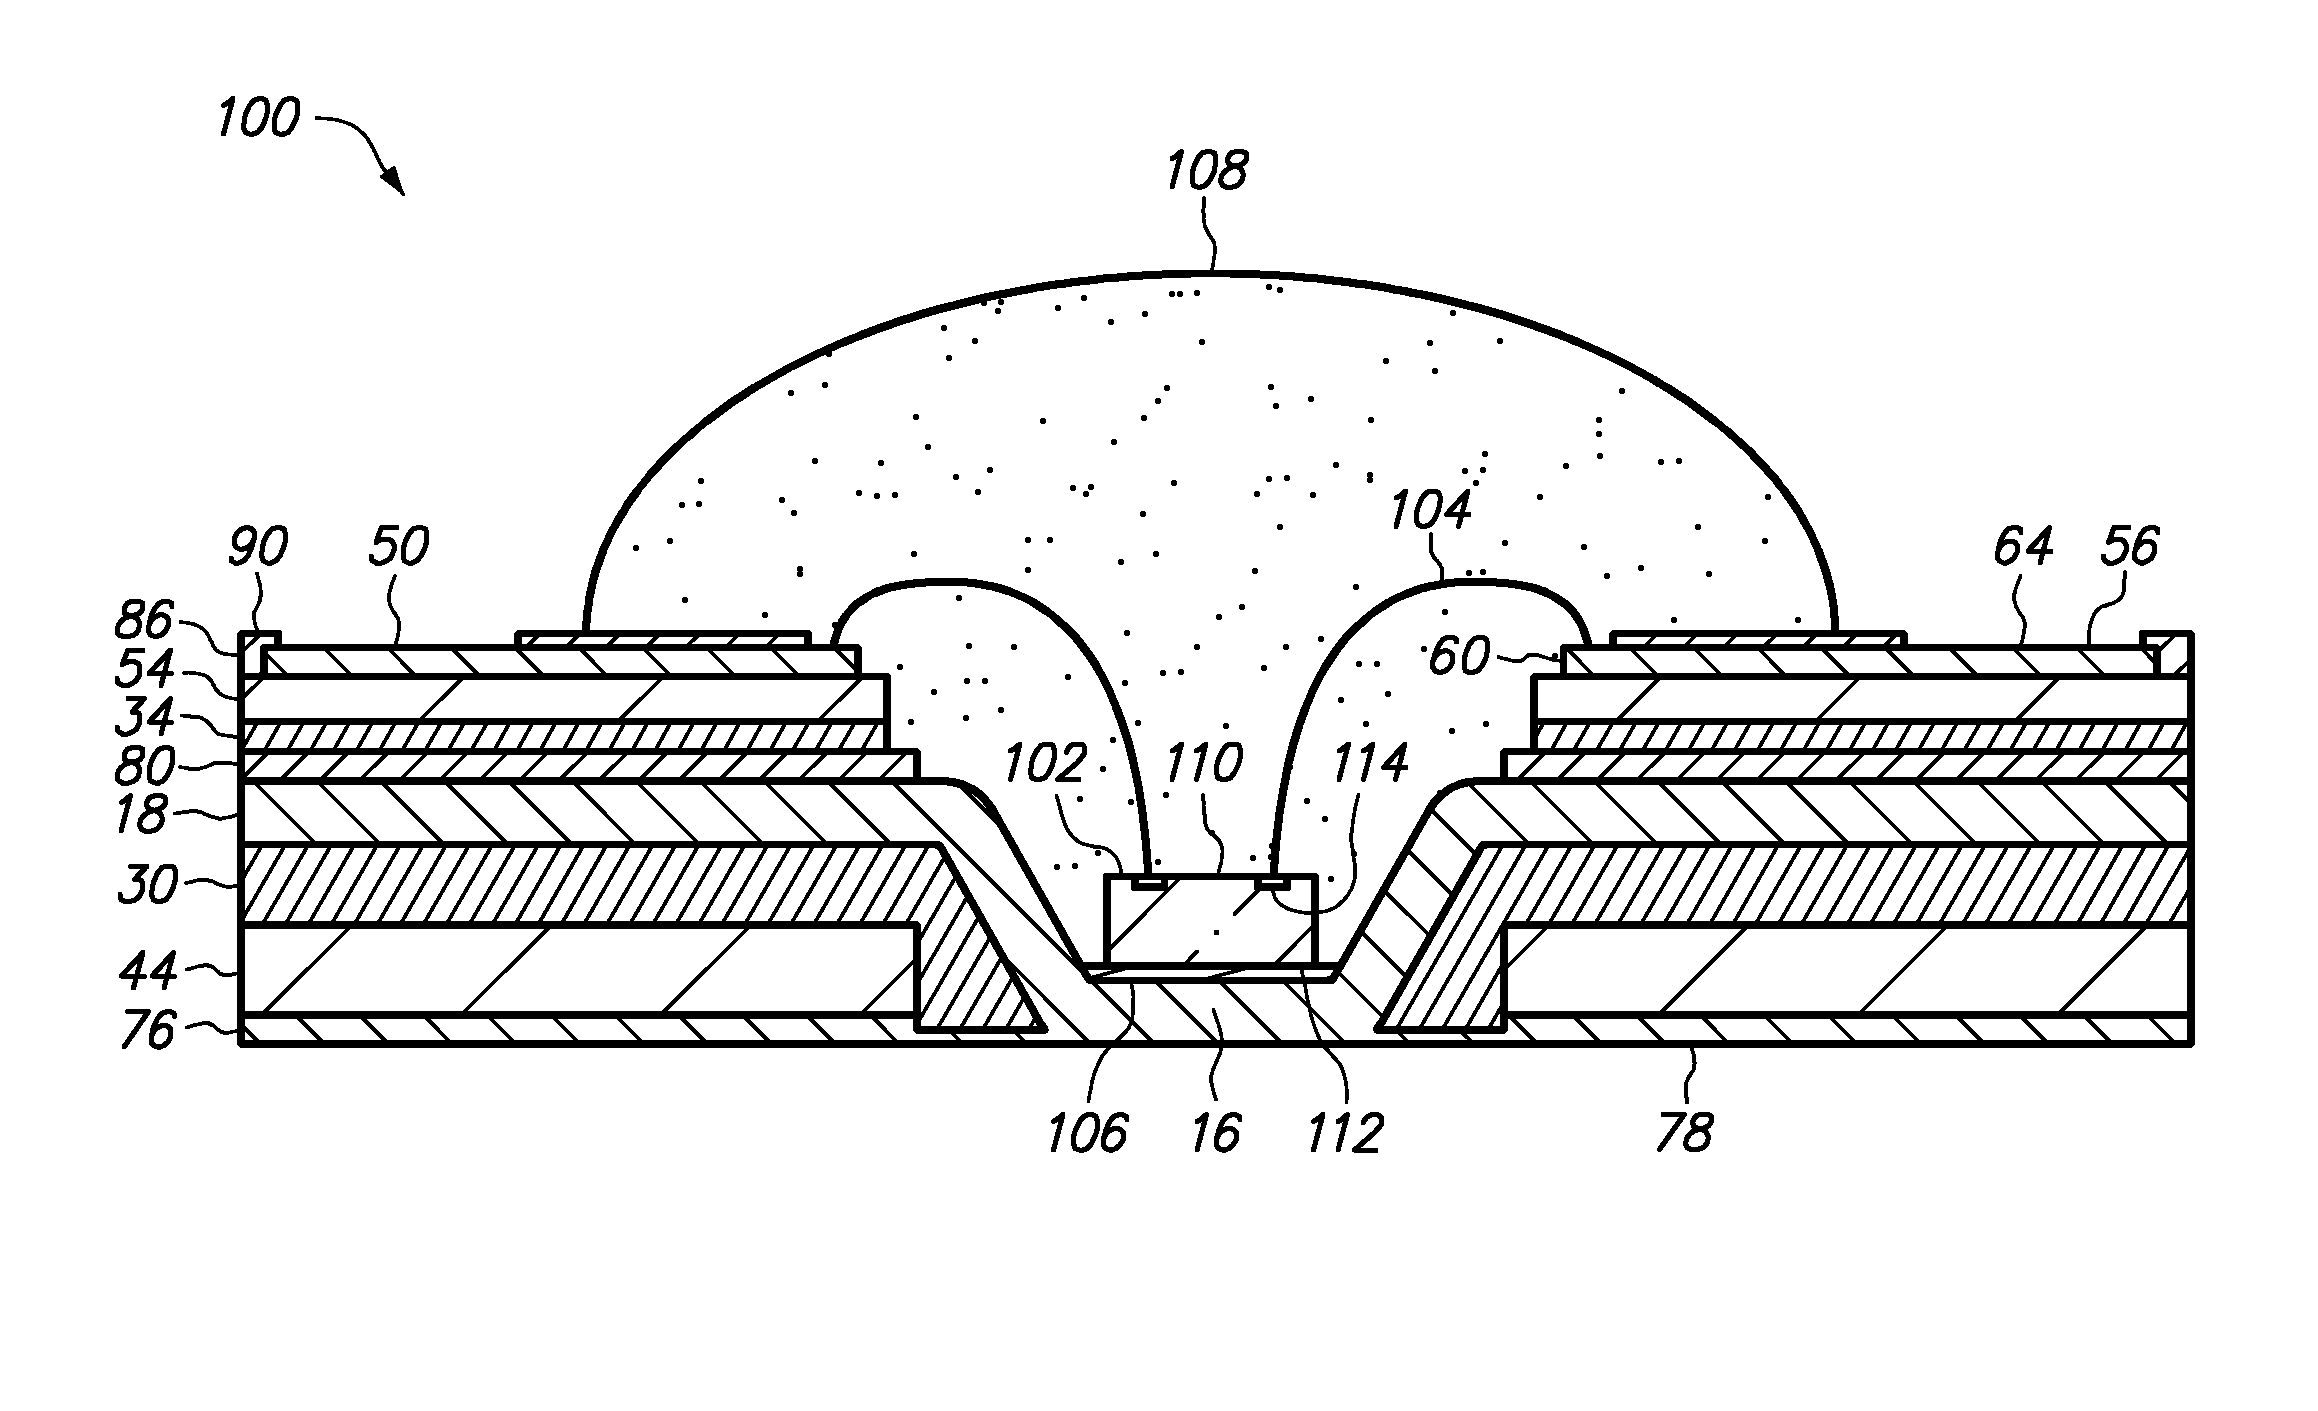 Method of making a semiconductor chip assembly with a bump/base/ledge heat spreader, dual adhesives and a cavity in the bump